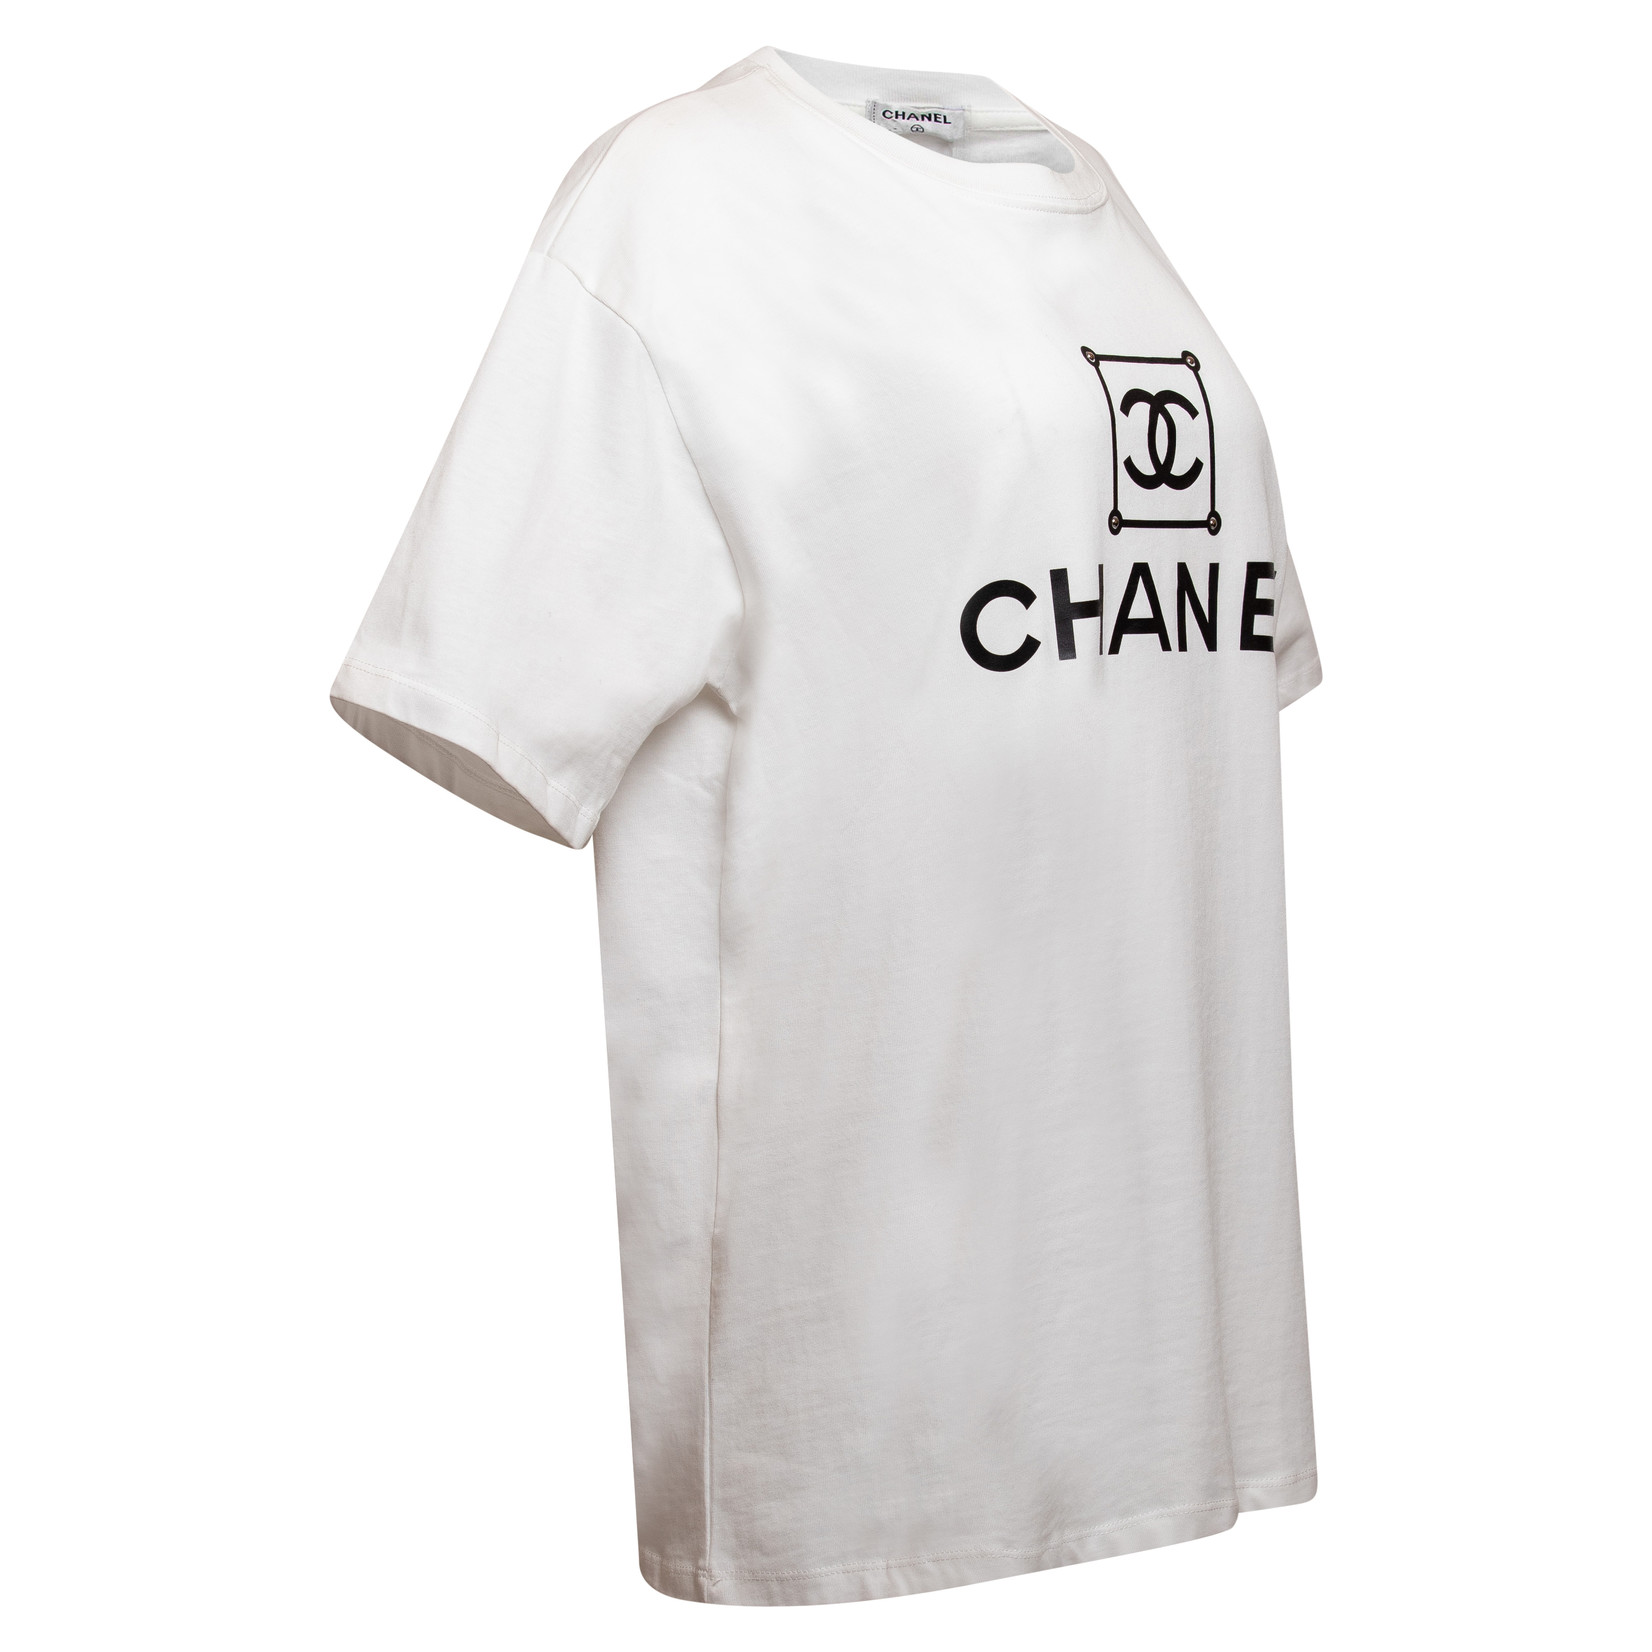 Chanel  White Embellished Monte Carlo TShirt  VSP Consignment